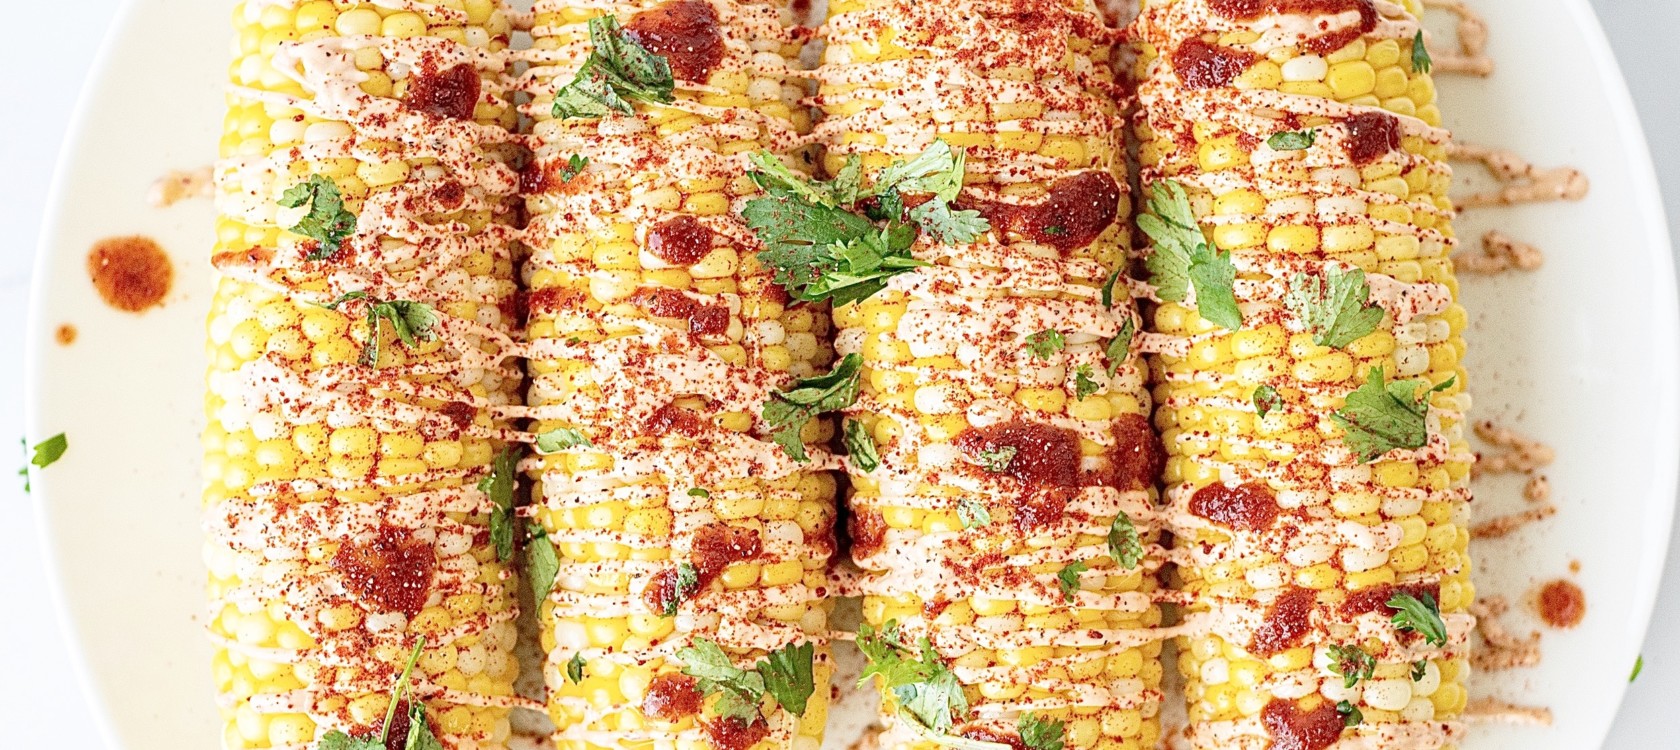 Spicy Mexican Corn on the Cob Picture